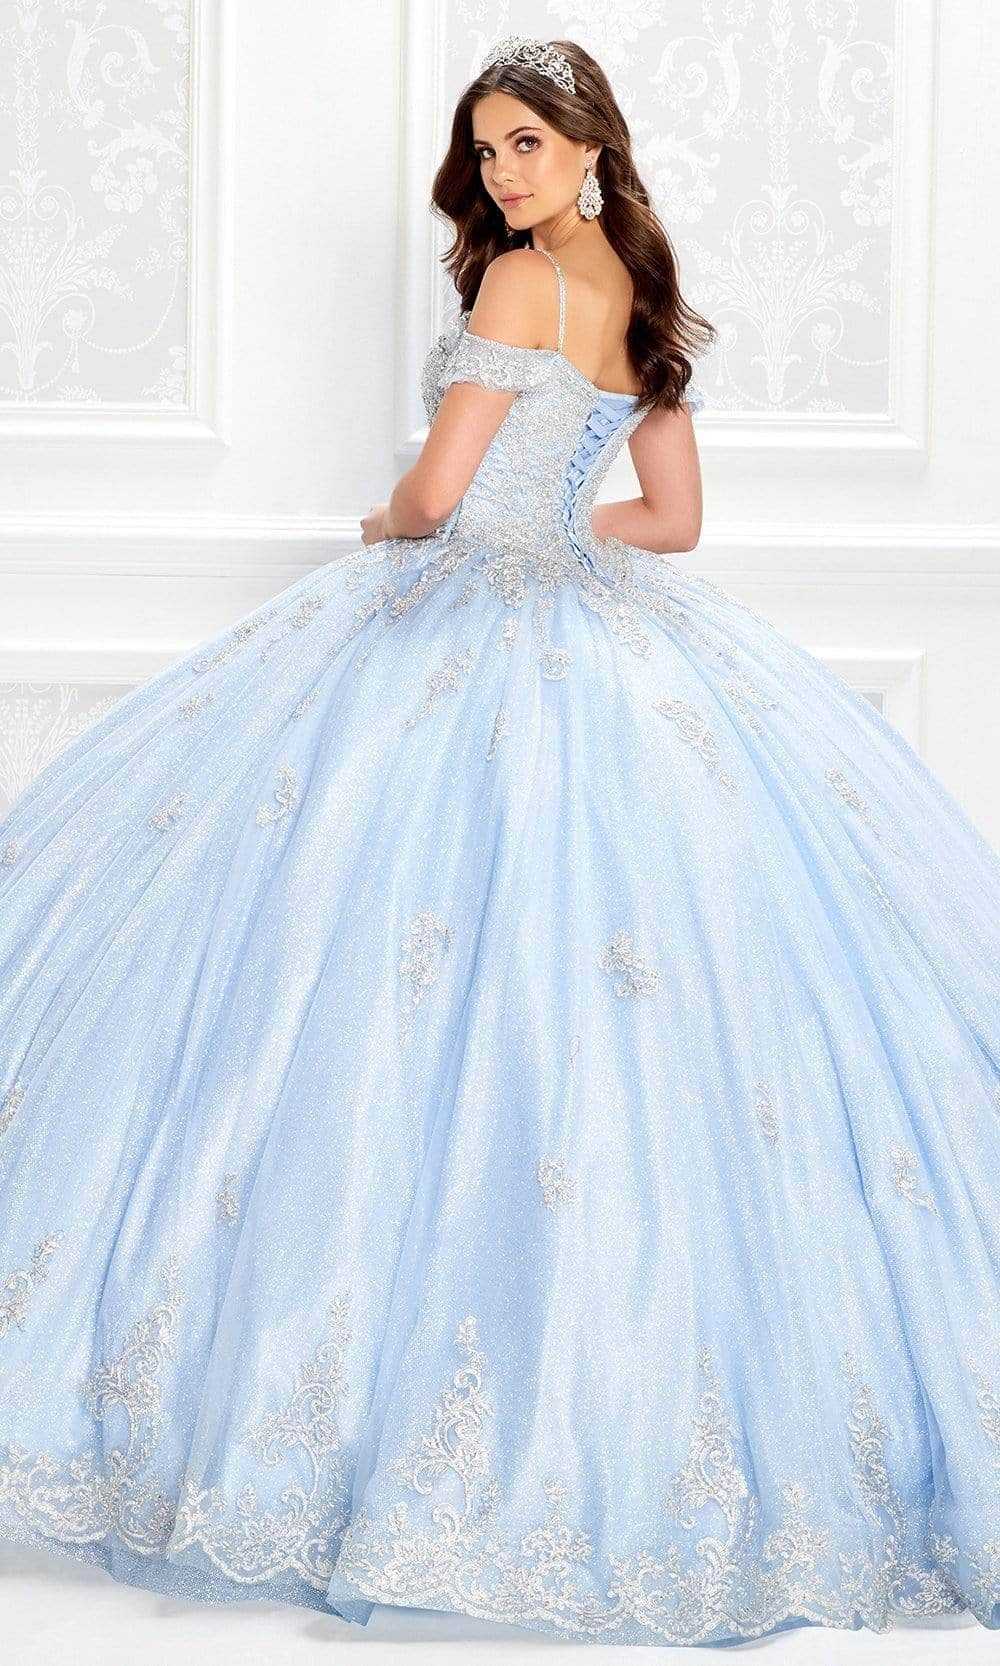 Princesa by Ariana Vara, Princesa by Ariana Vara - PR22032 Lace Style Ball Gown